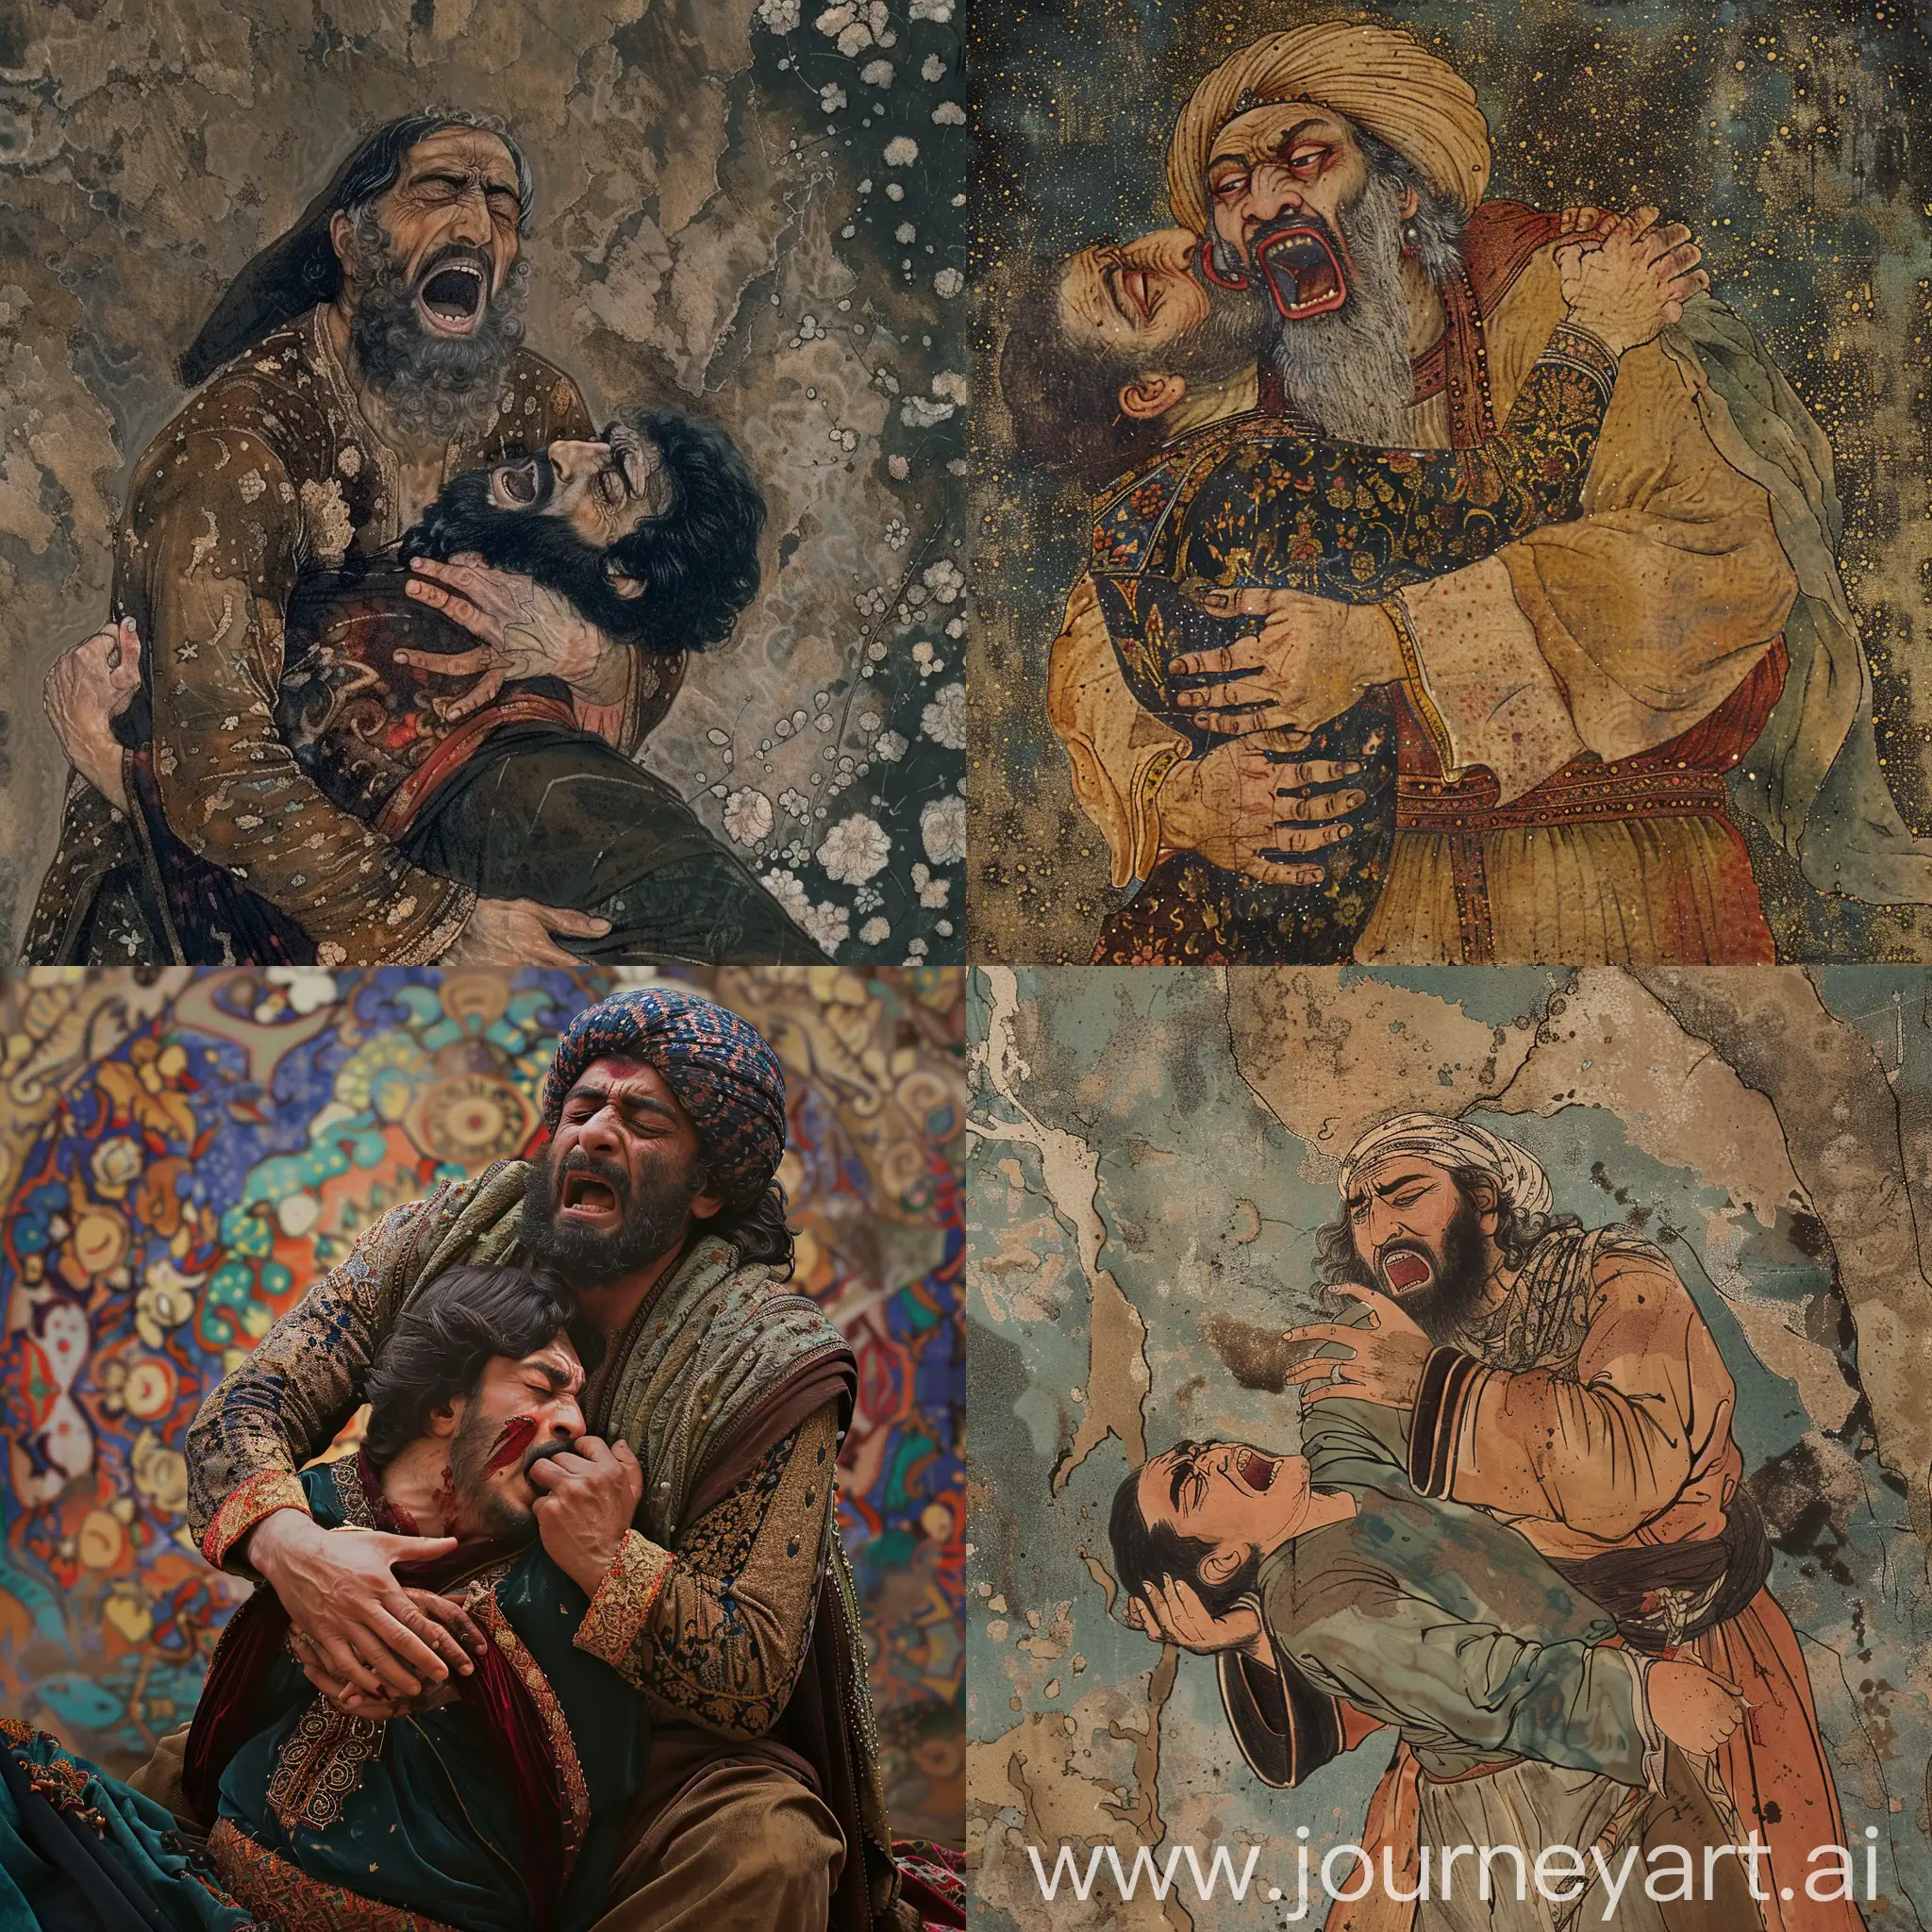 create an image capturing the poignant moment of the tragic aftermath of the battle between Rostam and Sohrab from the Shahnameh. In this scene, Rostam is depicted in a state of despair, crying and screaming desperately as he holds his son, Sohrab, in his arms. It’s a powerful representation of the emotional intensity found in the epic poem.